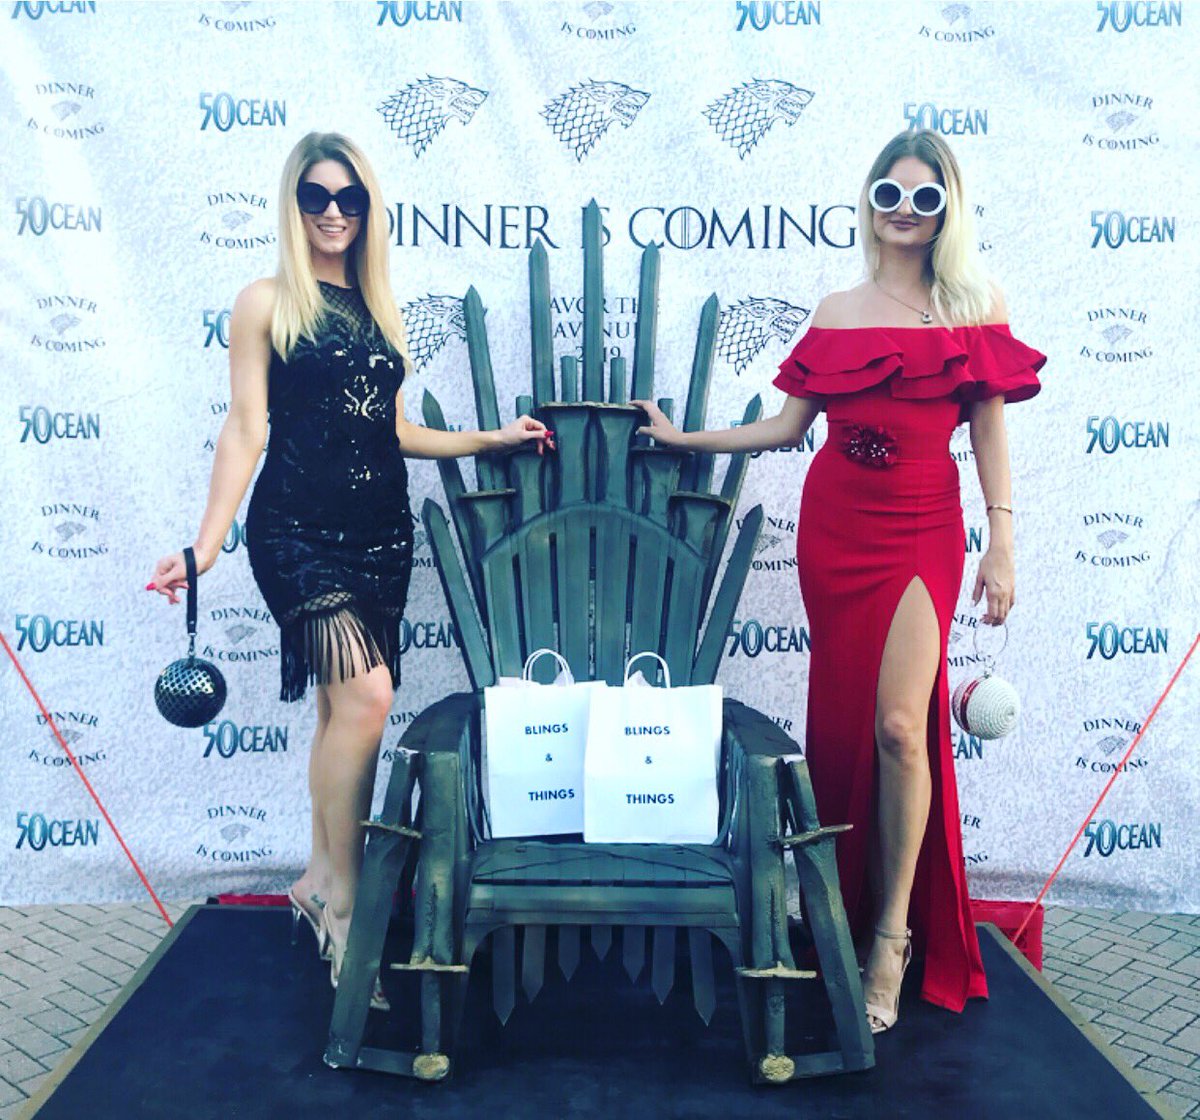 Which model will win the Blings&Things #GamefThrones ? Which is your favorite look? #Fashionista #fashion #delraydda #downtowndelray #atlanticavenue #shopping #shopsmall #shoplocal #visitdelray #dresses #look #glamour #sunglasses #eveningwear #fun #got